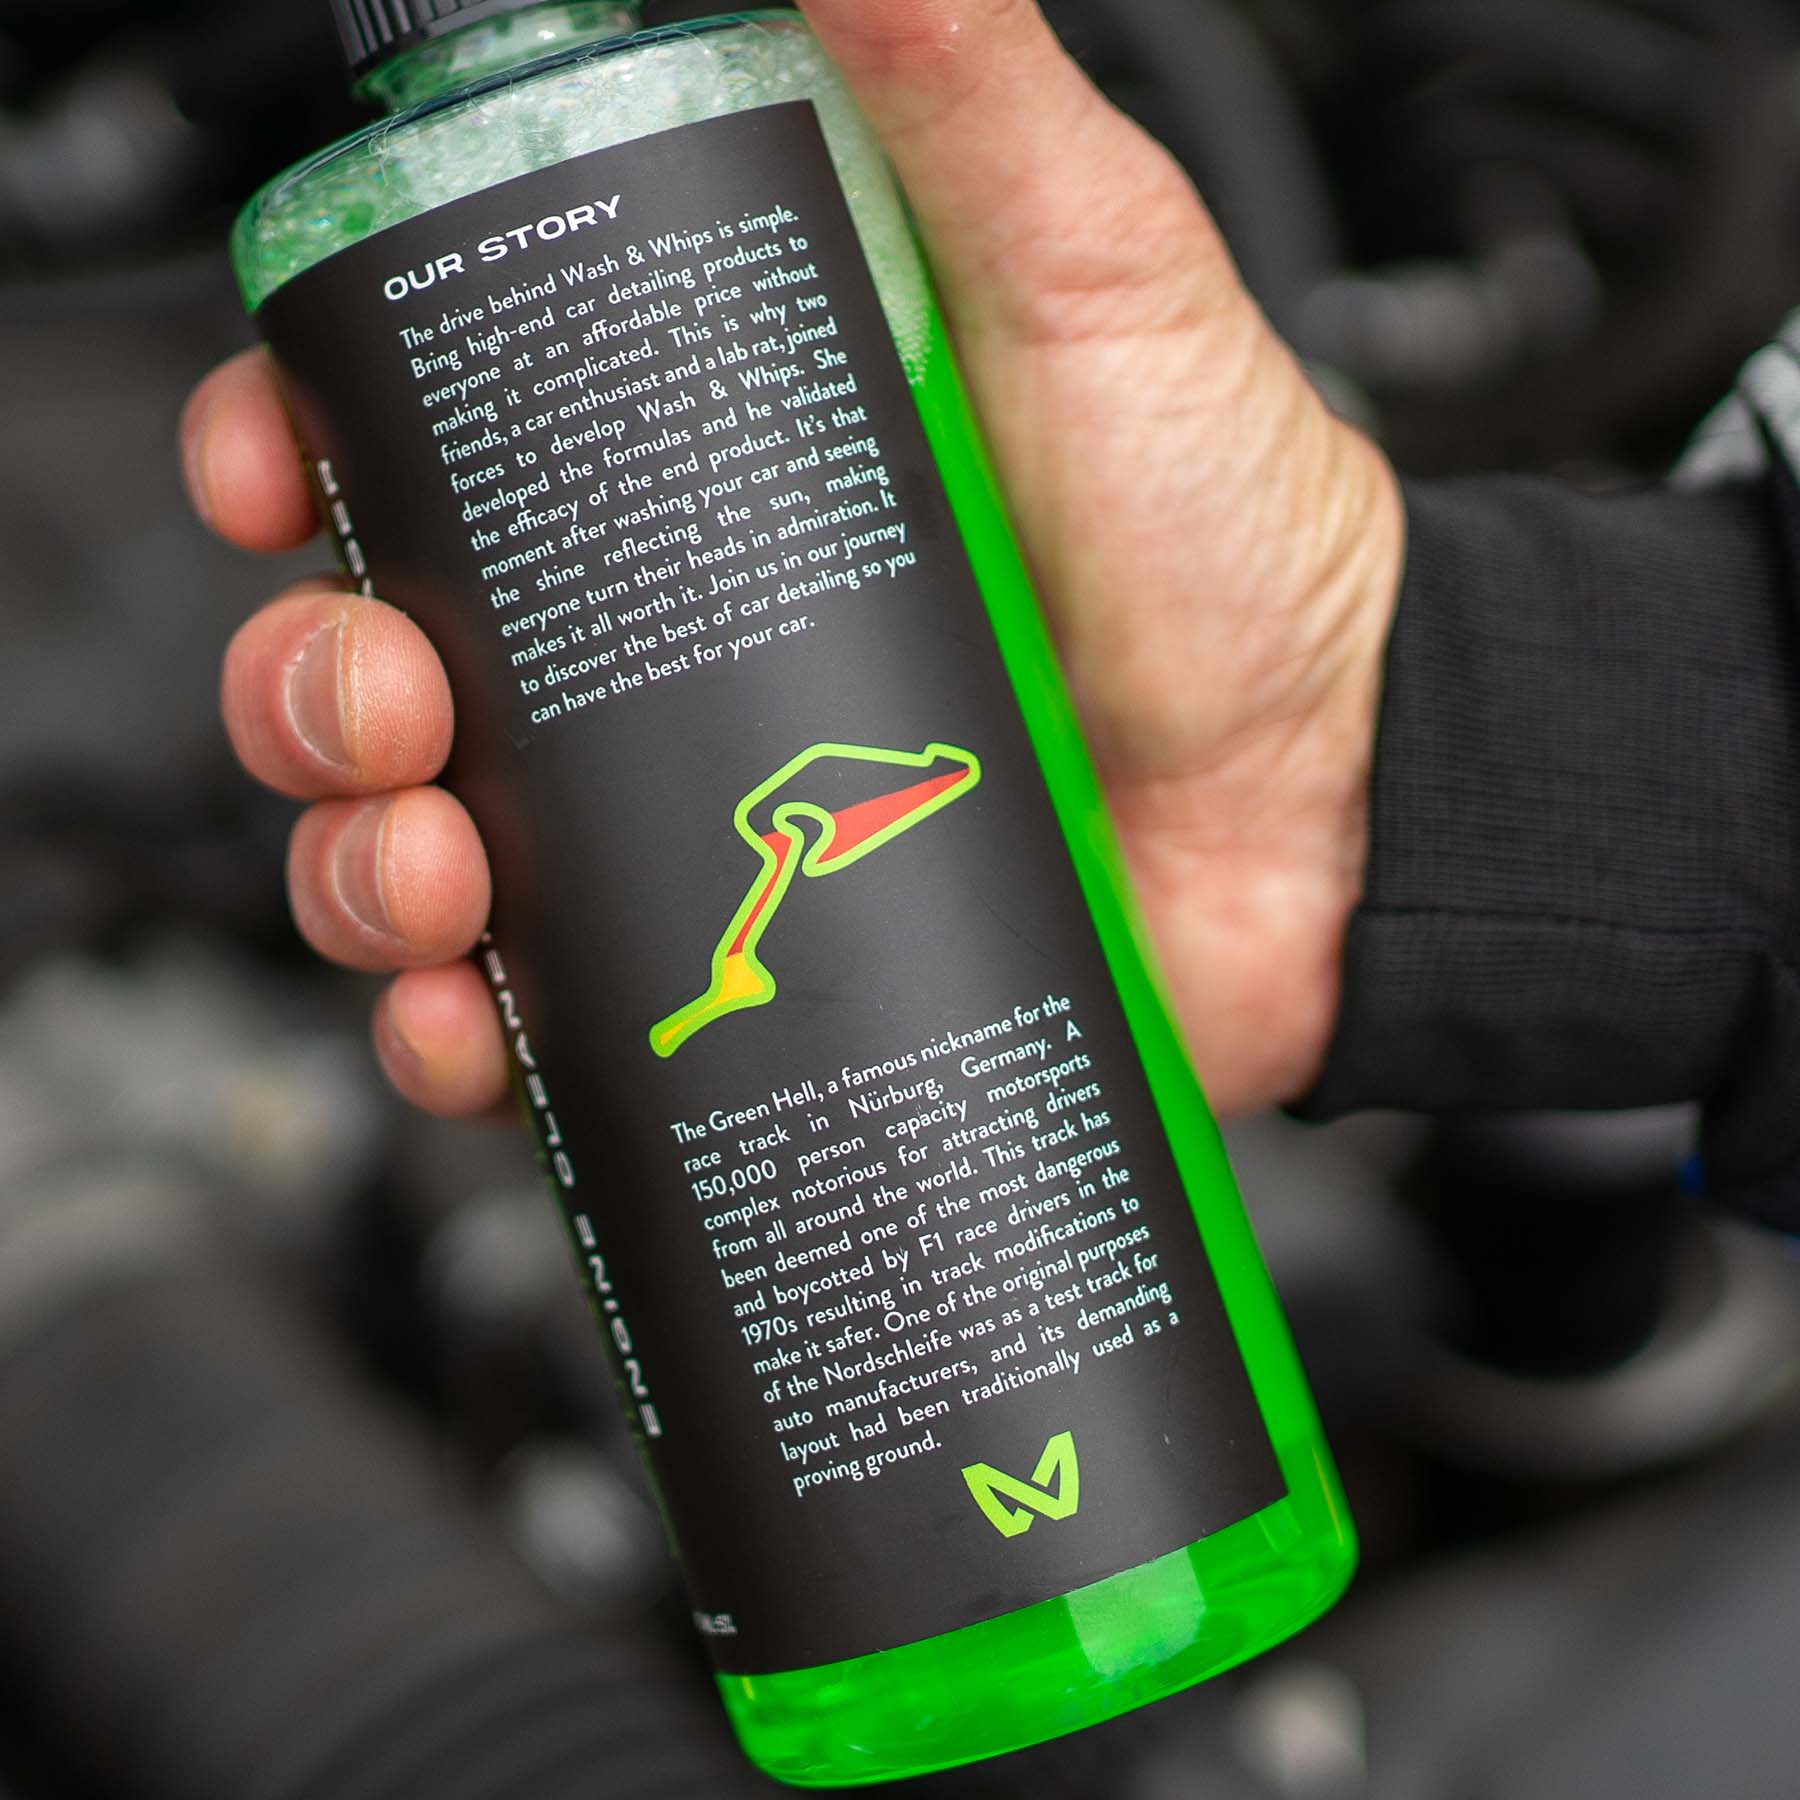 Green Hell Engine Cleaner & Degreaser